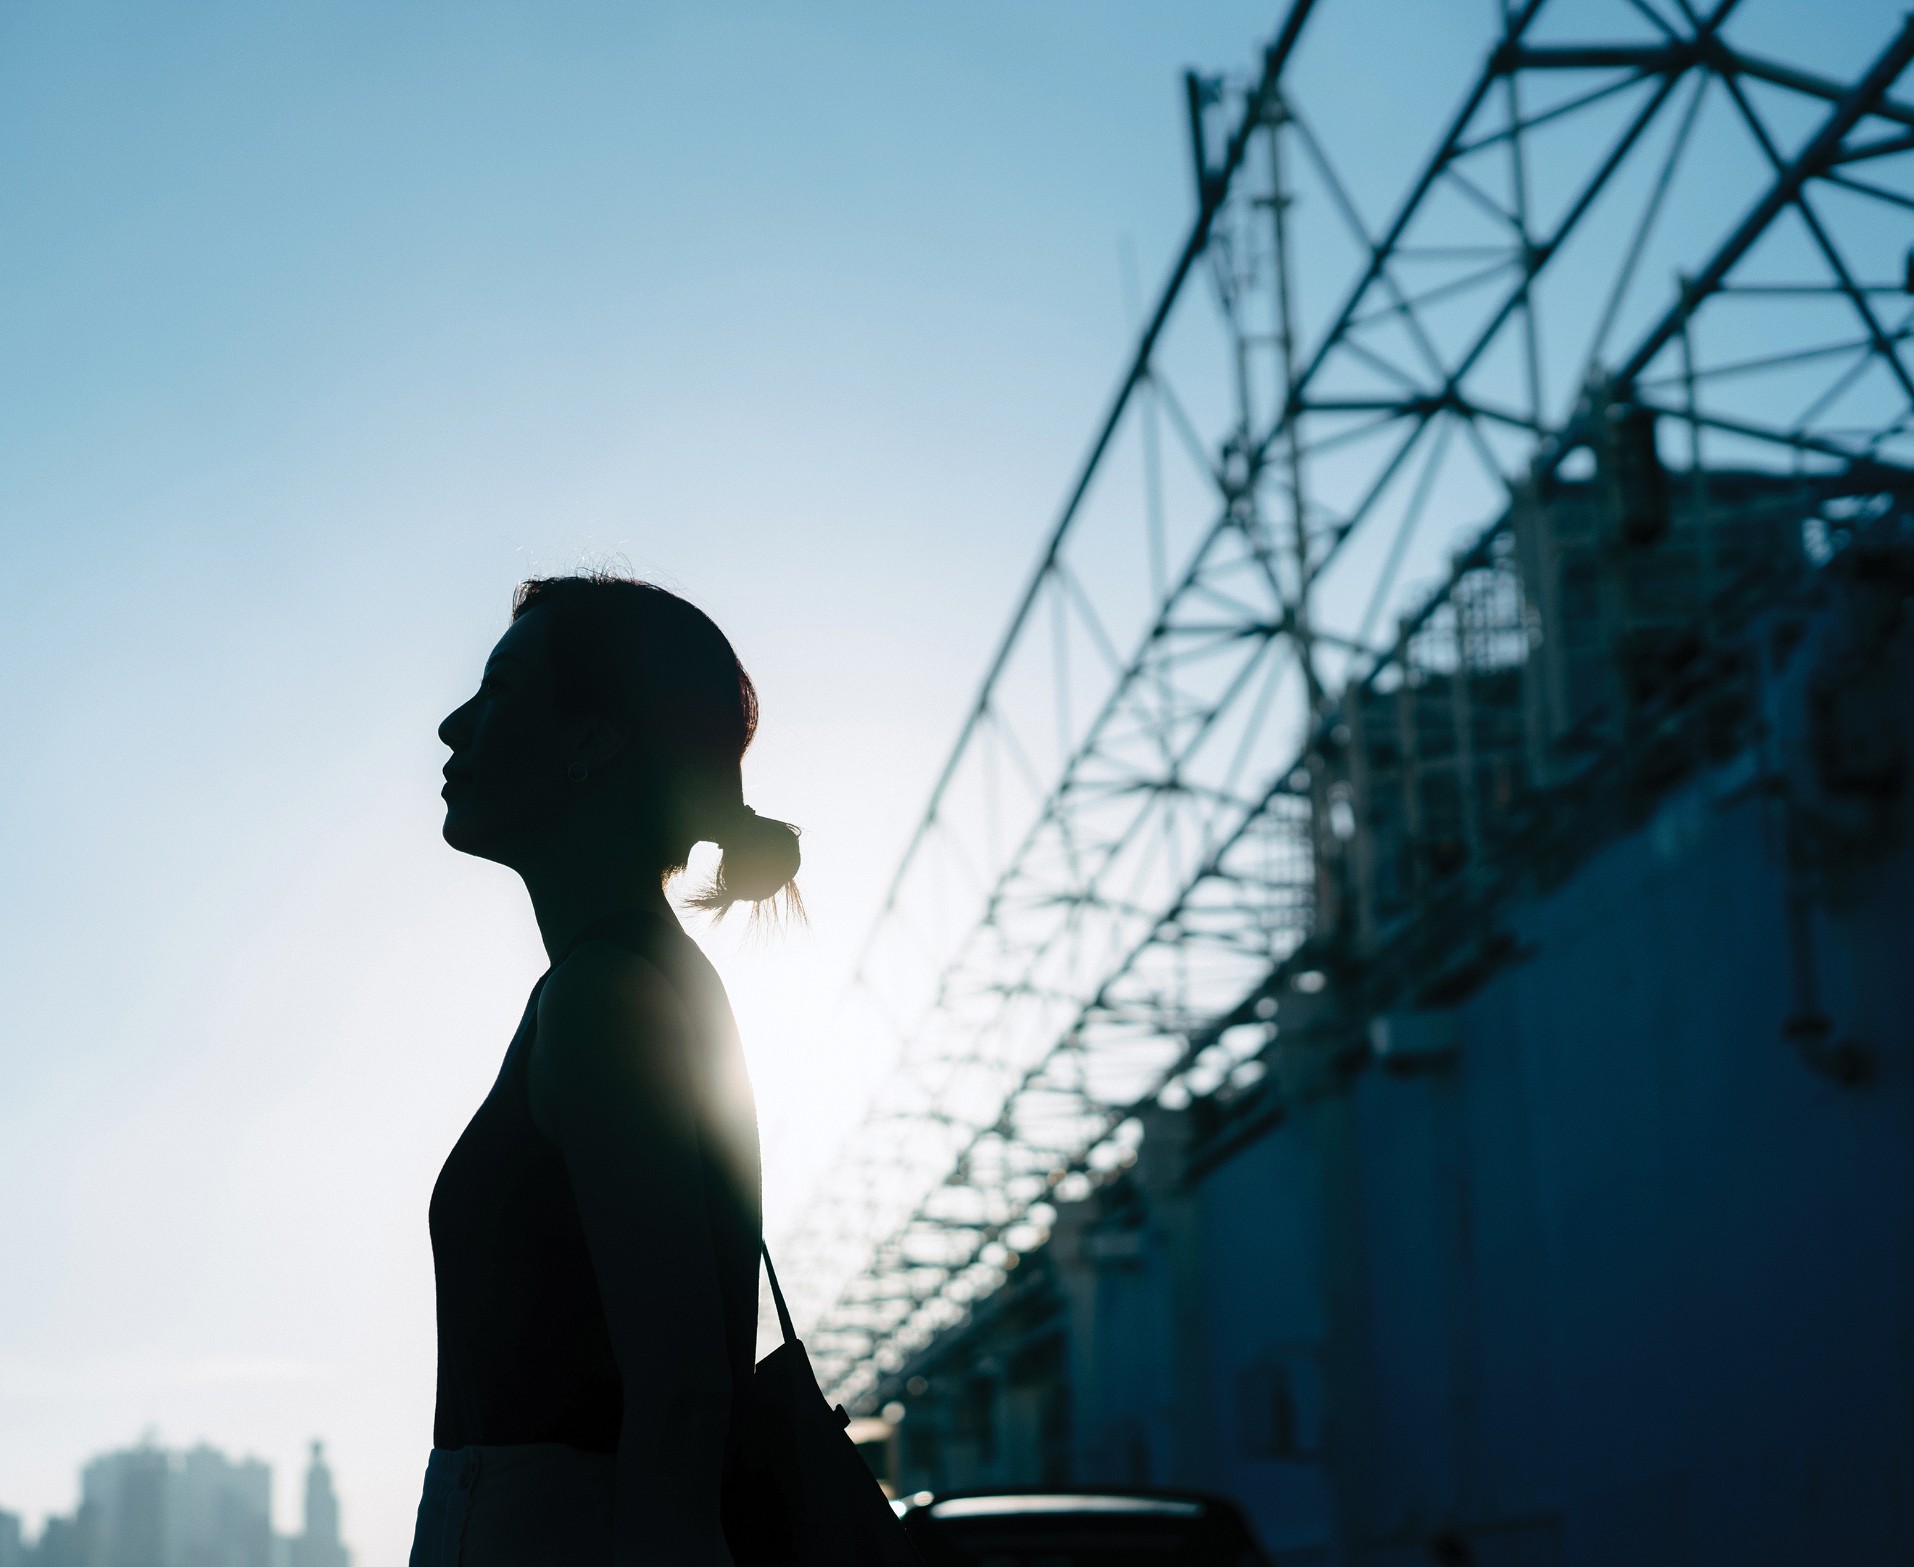 The silhouette of a woman standing in front of a construction project.